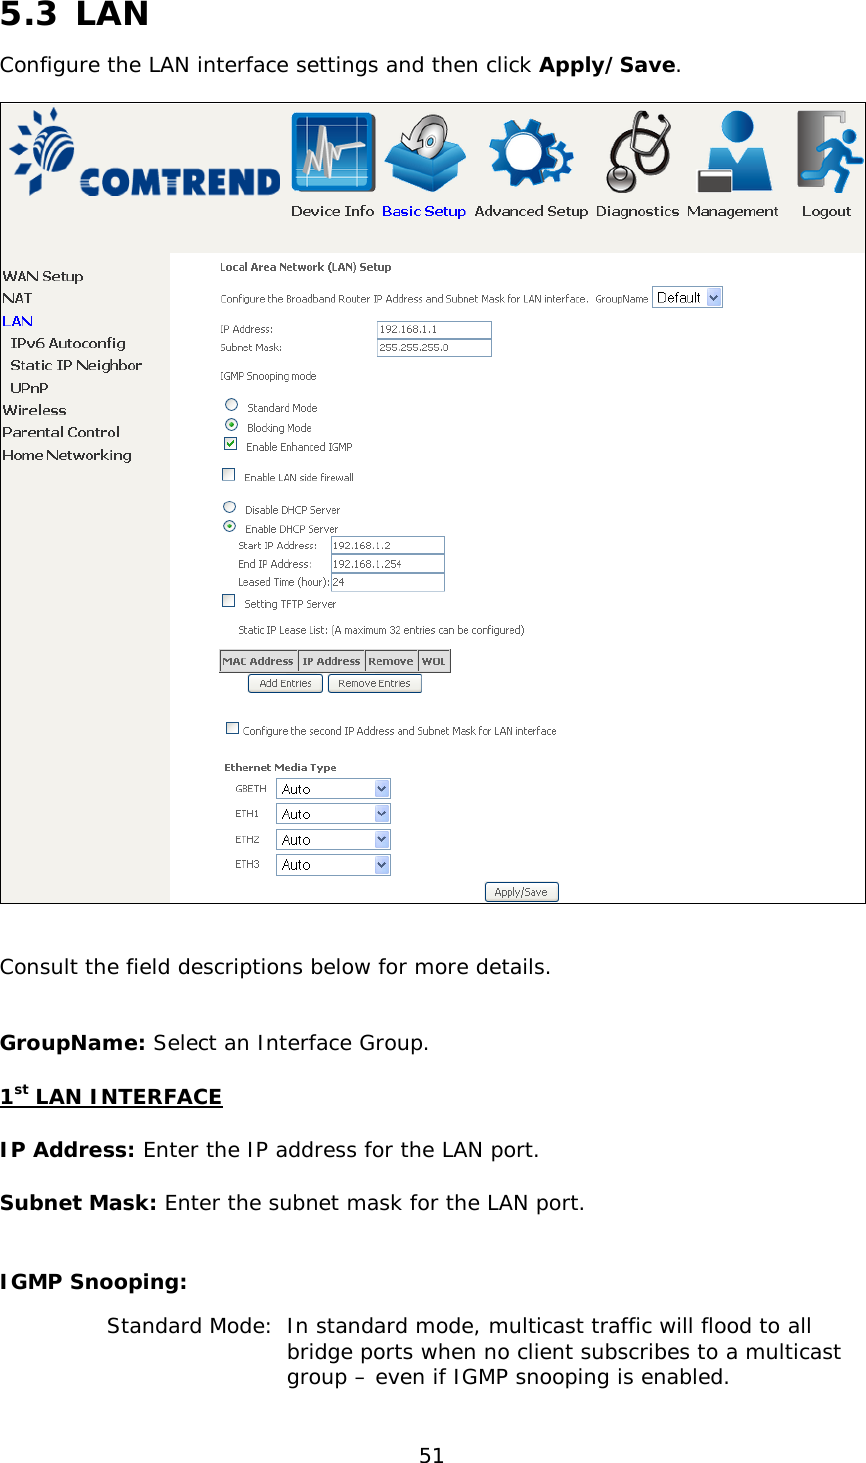  51  5.3 LAN Configure the LAN interface settings and then click Apply/Save.    Consult the field descriptions below for more details.  GroupName: Select an Interface Group. 1st LAN INTERFACE IP Address: Enter the IP address for the LAN port. Subnet Mask: Enter the subnet mask for the LAN port.  IGMP Snooping:       Standard Mode:  In standard mode, multicast traffic will flood to all      bridge ports when no client subscribes to a multicast      group – even if IGMP snooping is enabled. 